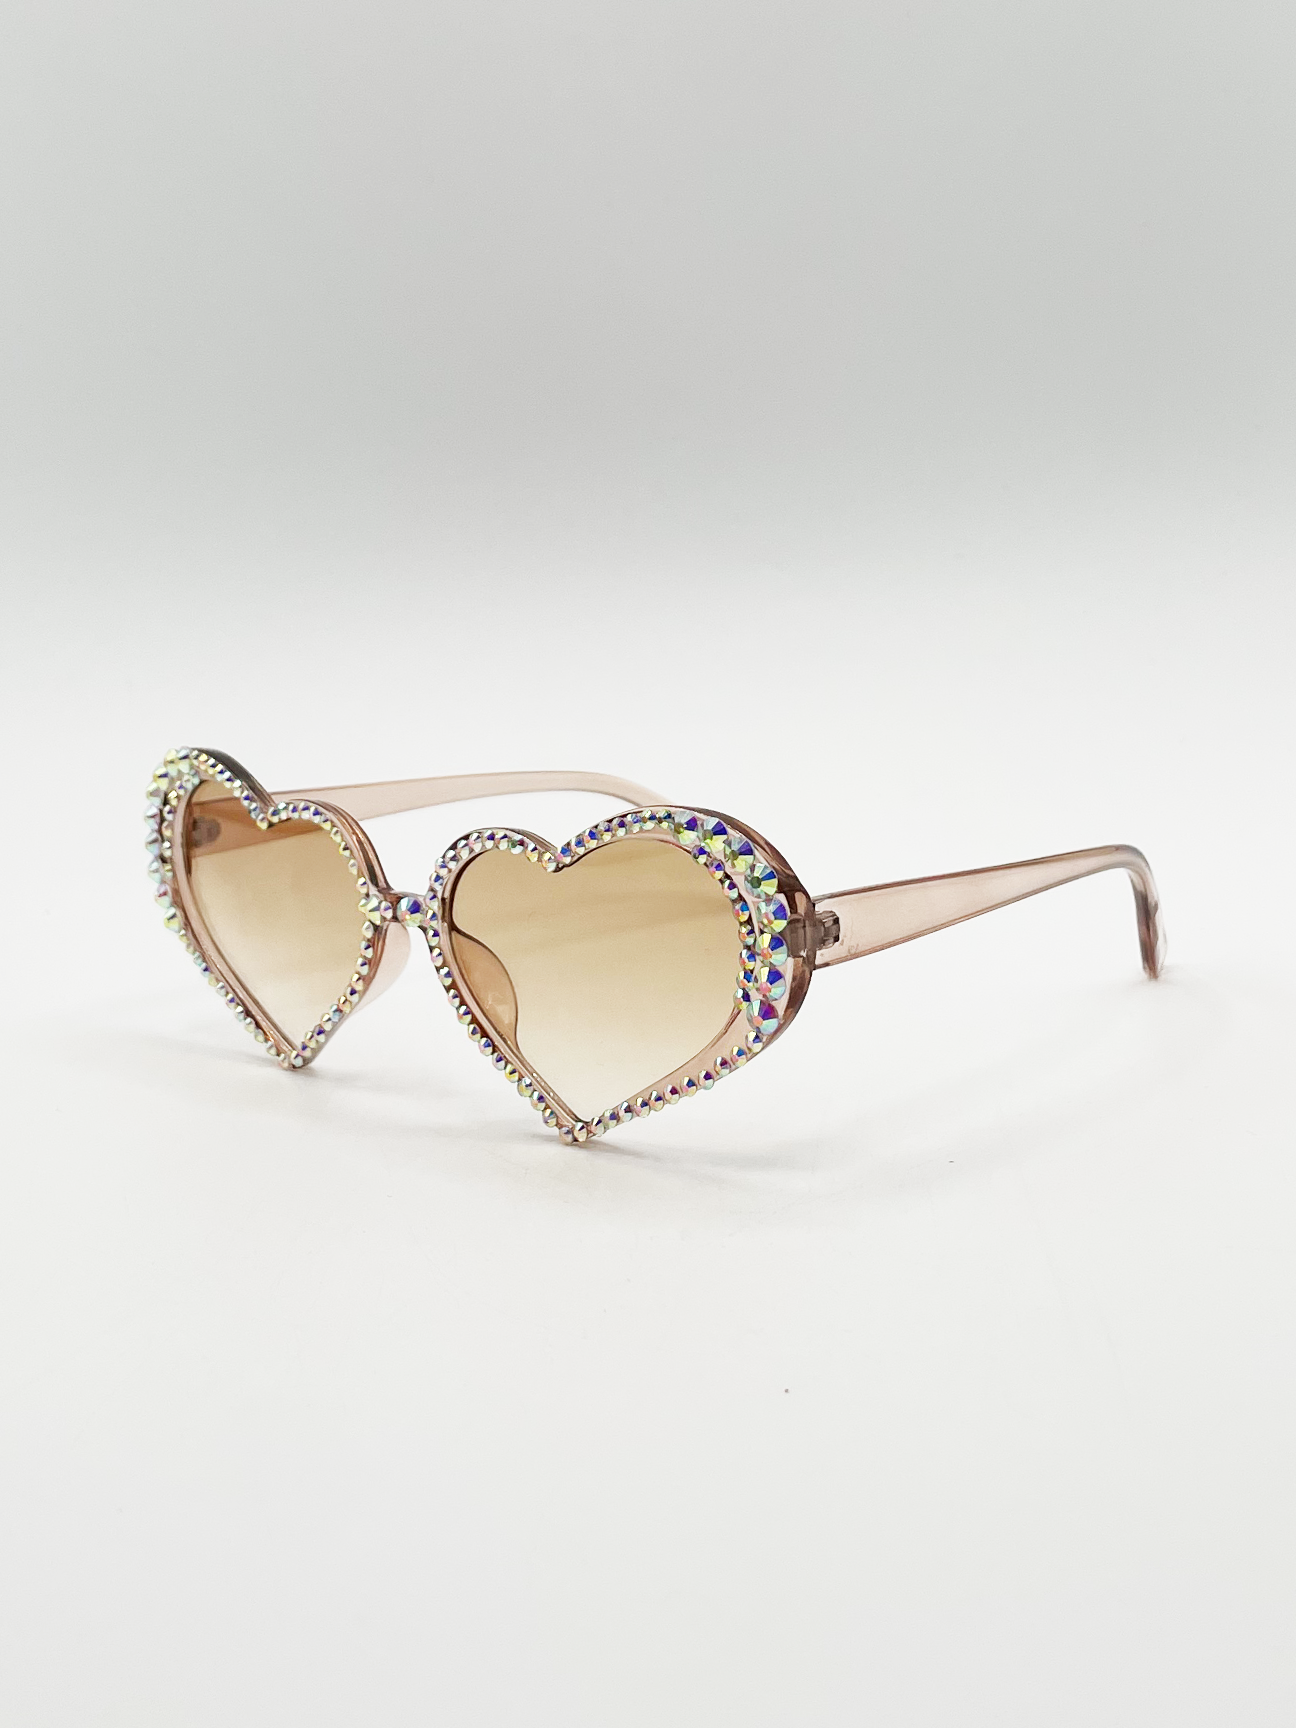 Heart Sunglasses with Gem Detail in Champagne